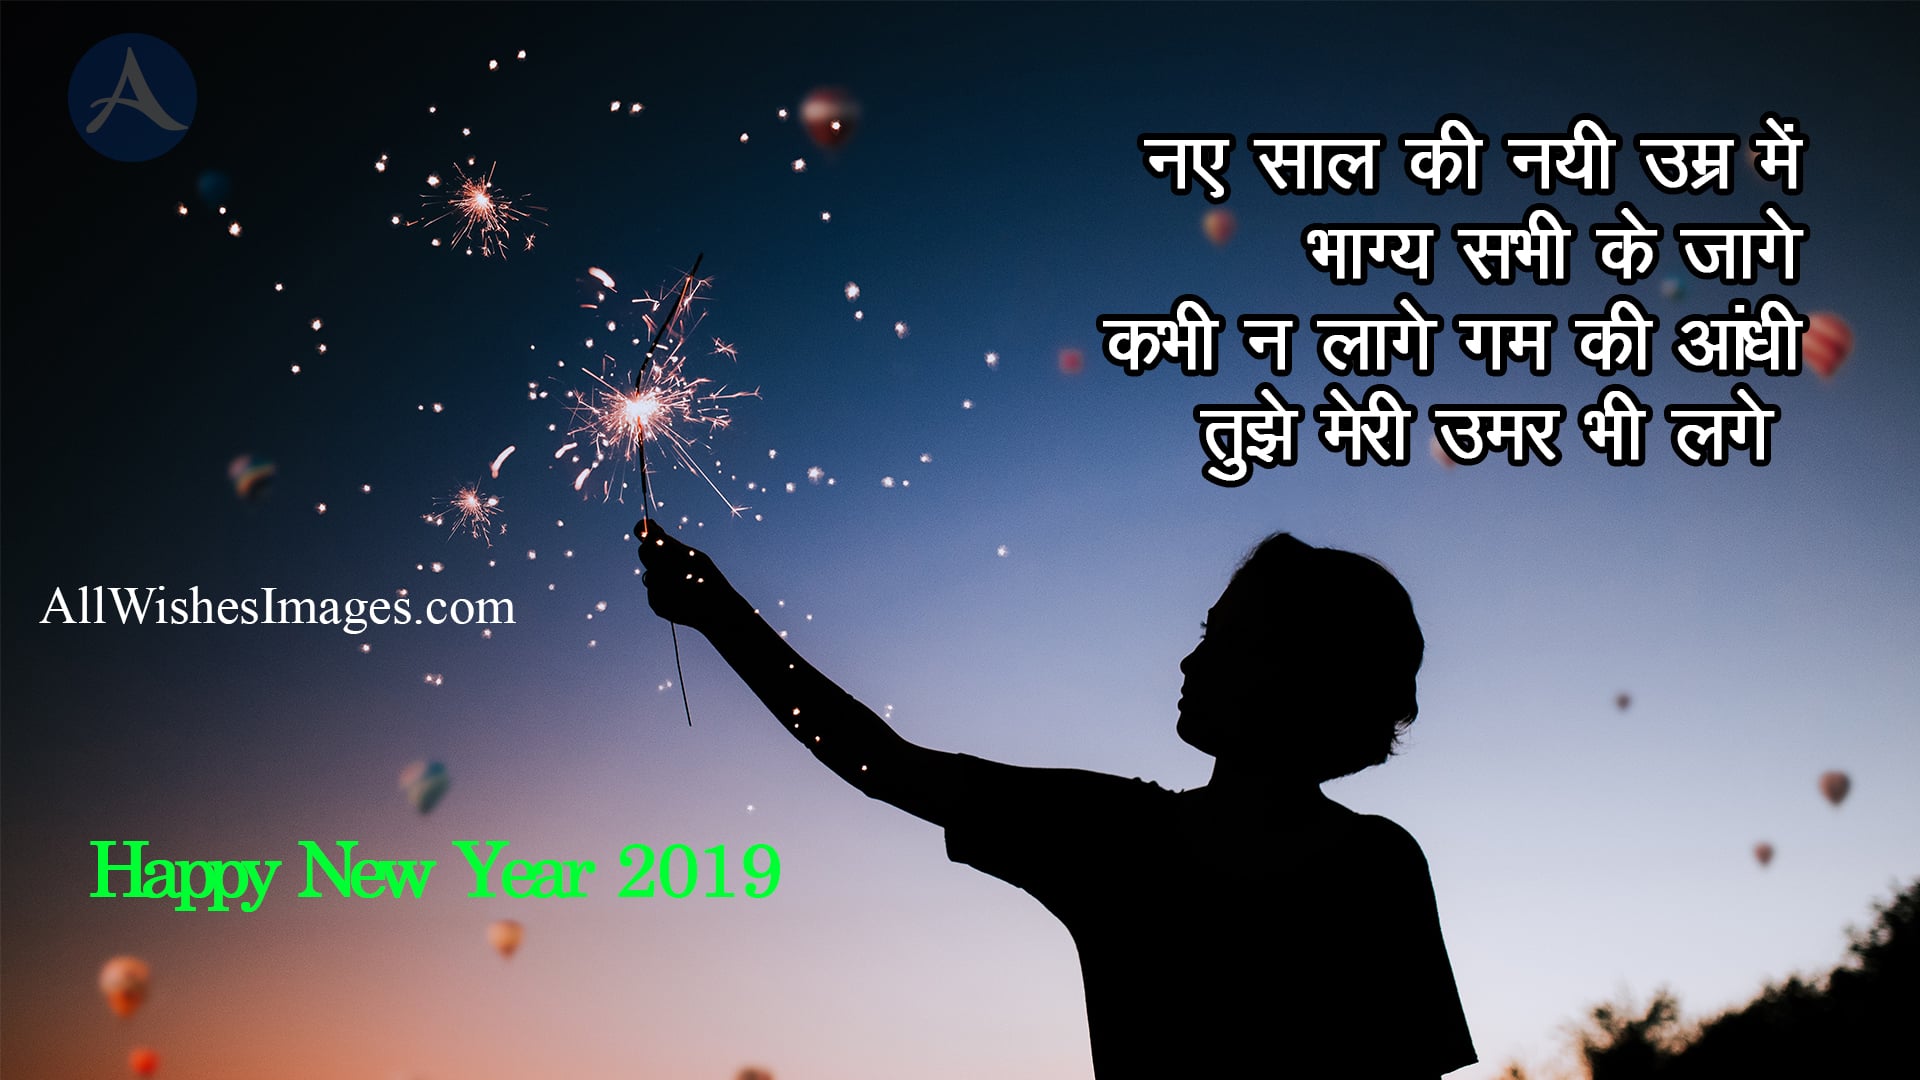 Happy New Year 2019 Images With Quote In Hindi - All Wishes Images - Images  for WhatsApp